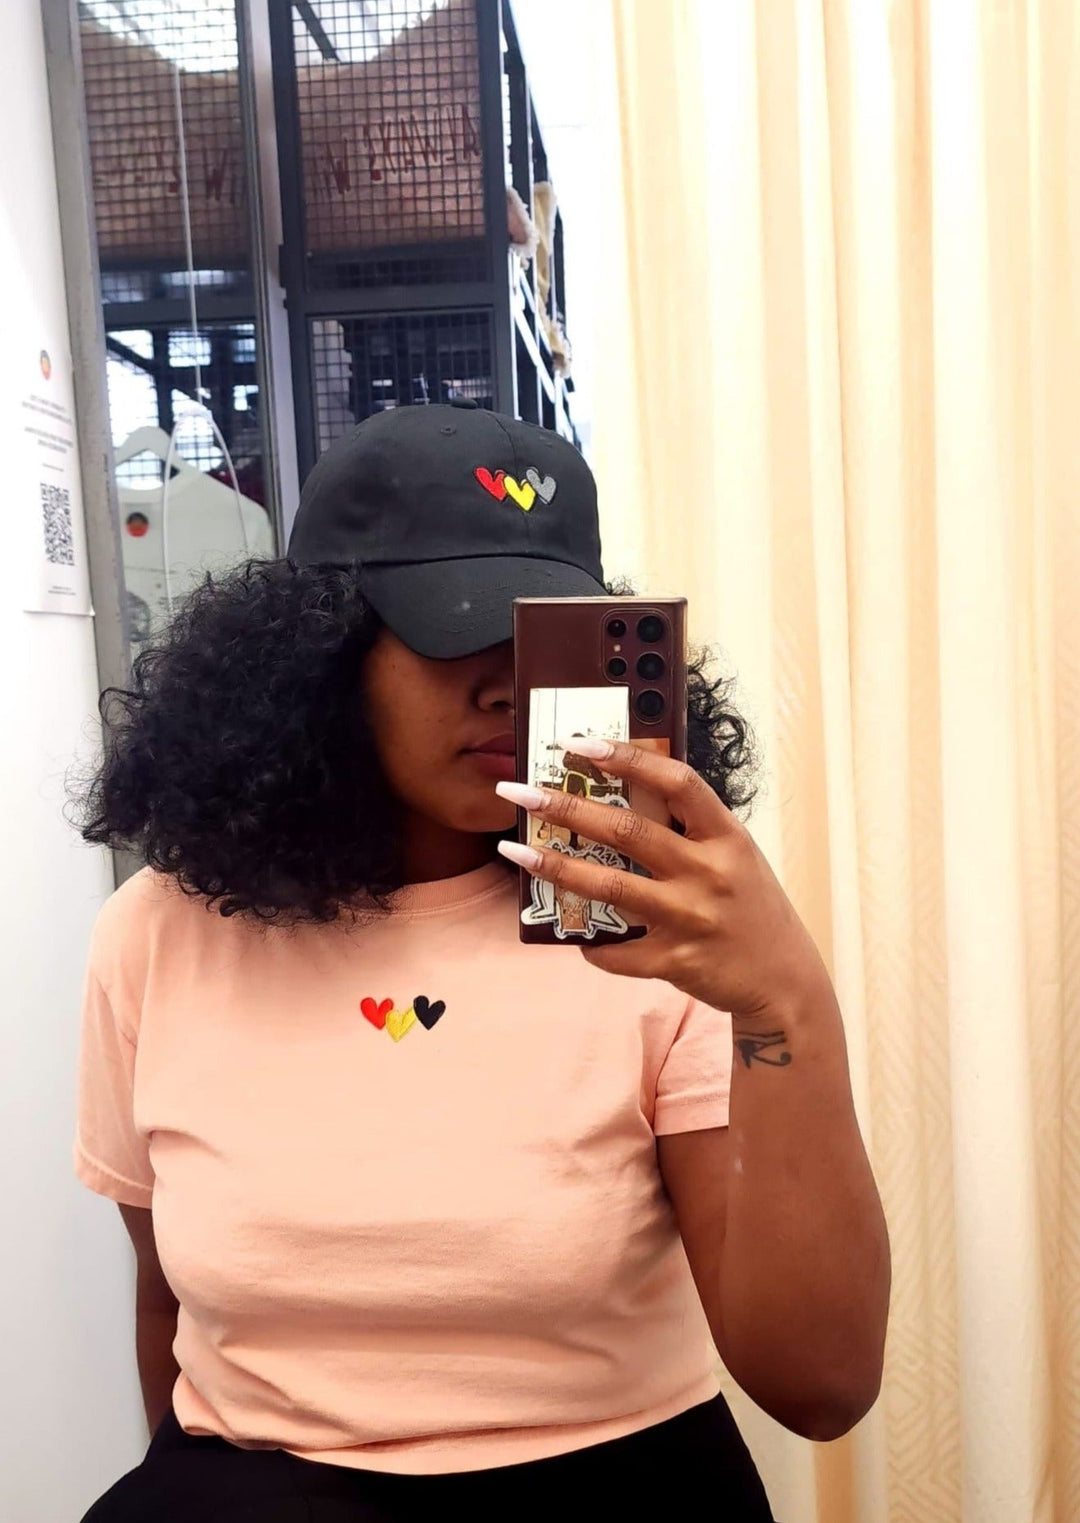 Clothing The Gaps.Peachy Blak Luv Crop Tee. peachy pink cropped tee with  Red, black and yellow hearts embroiled on front the colours of the aboriginal flag.